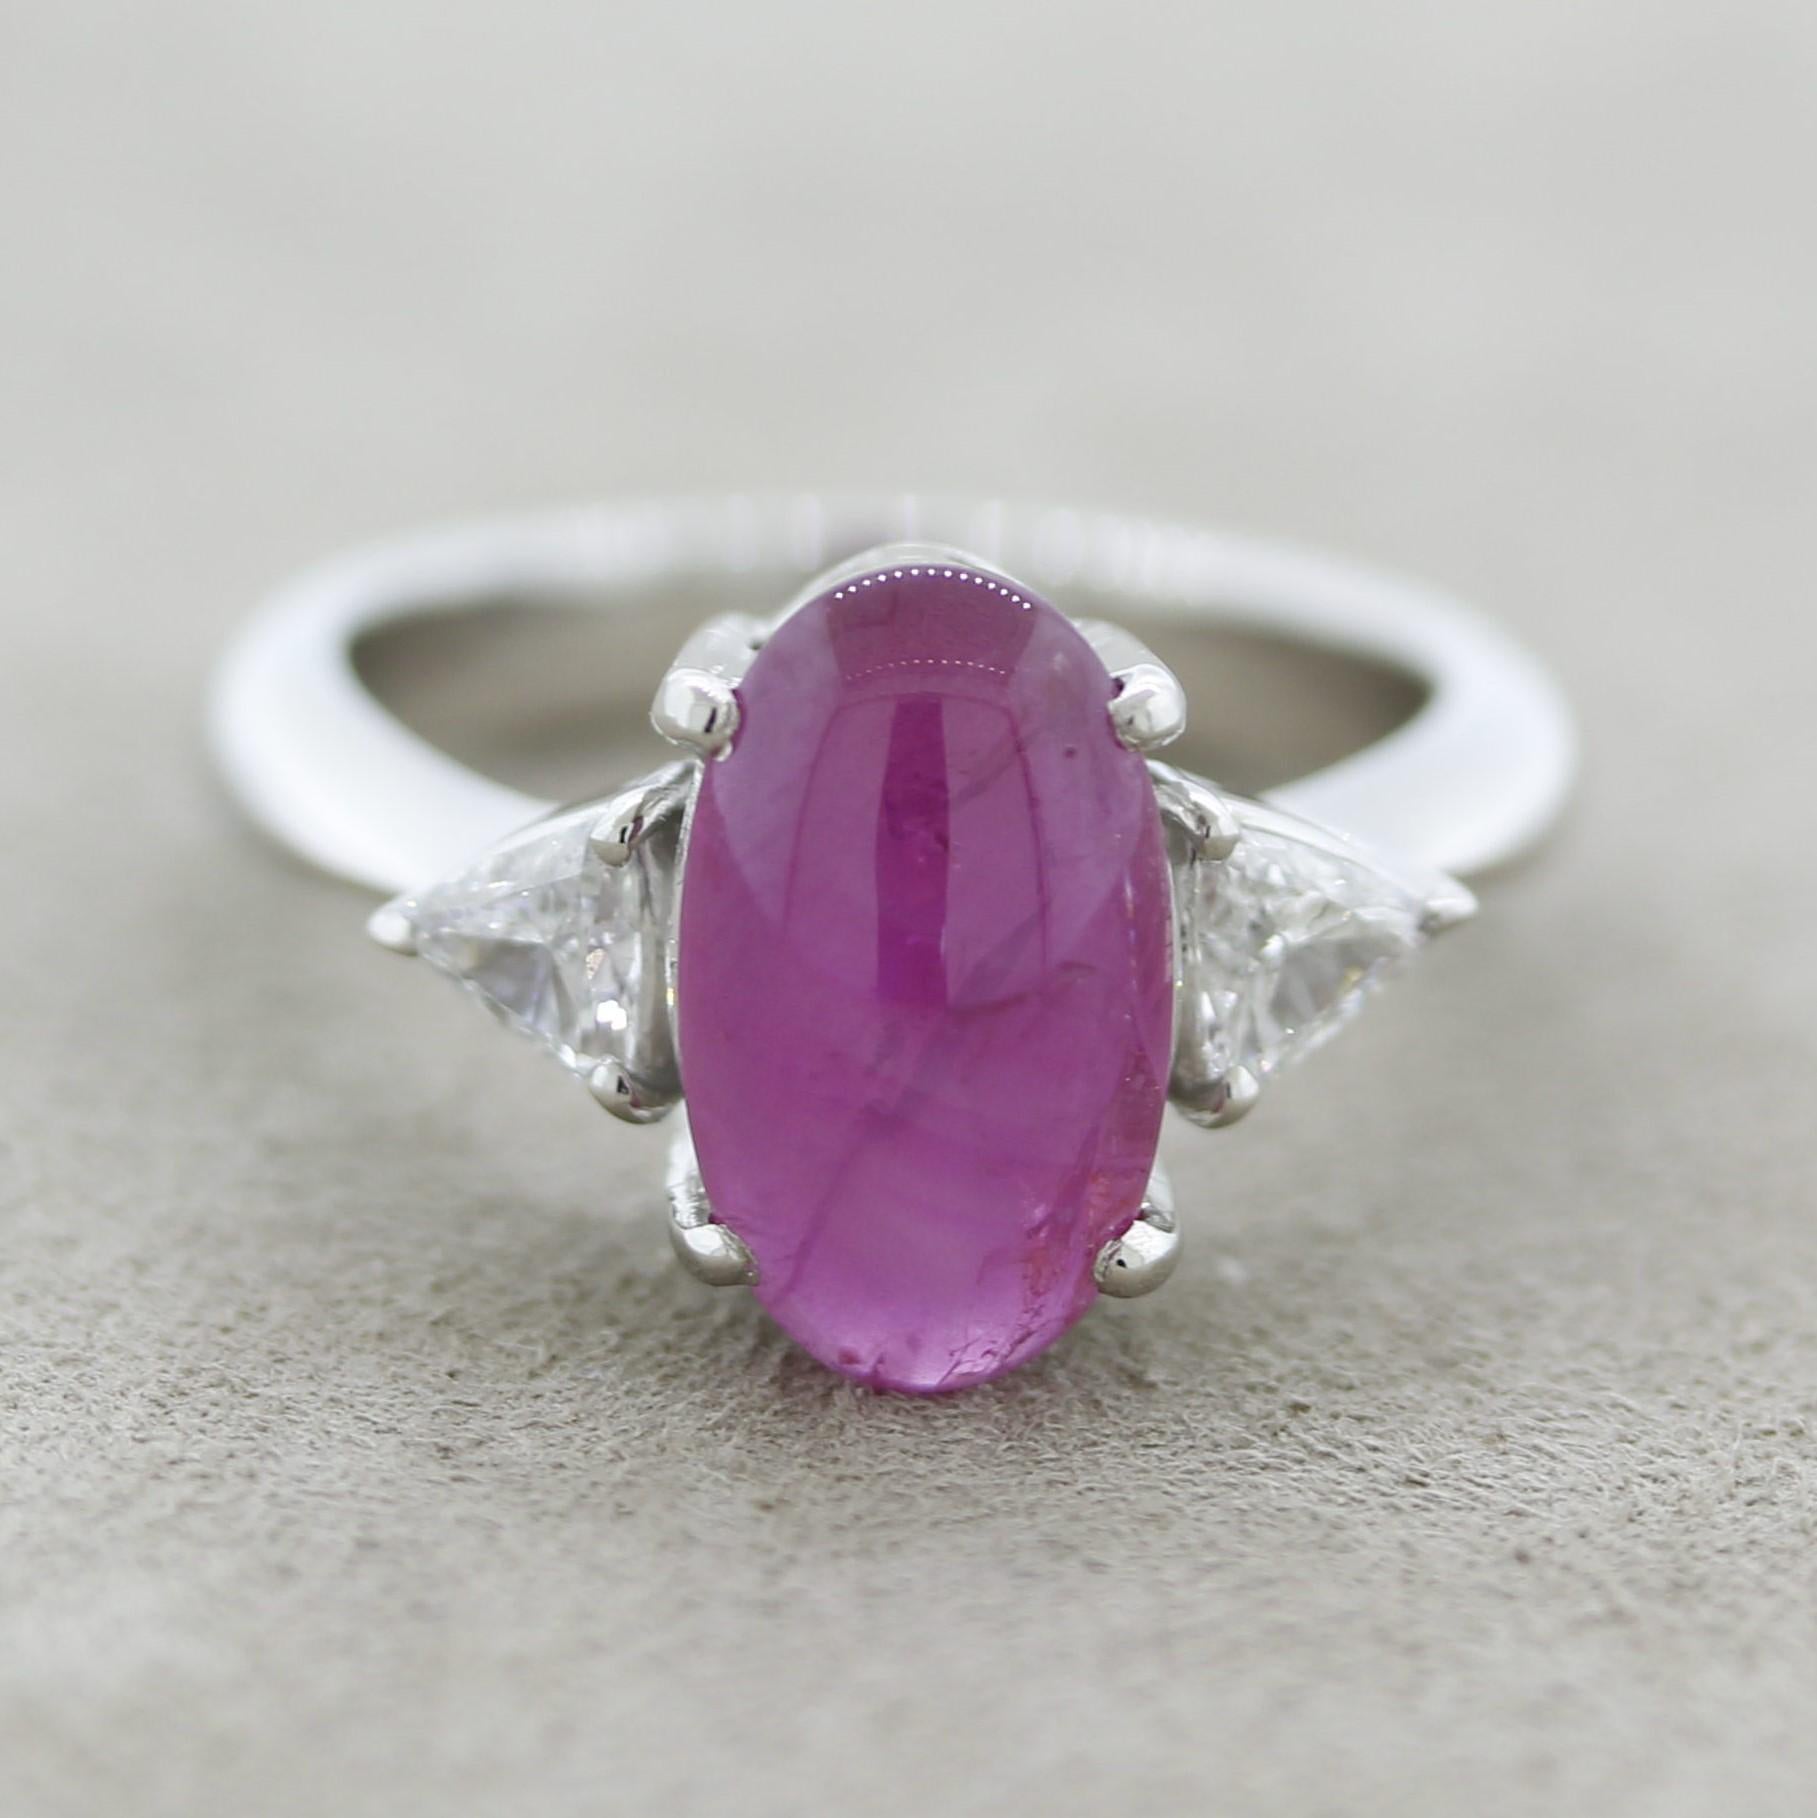 A lovely platinum ring featuring a 4.07 carat natural star ruby with no treatments of any kind. When a light is shined on it, or when the sunlight hits the stone, it shows a stone 6-ray star (asterism). It is complemented by two triangular-cut